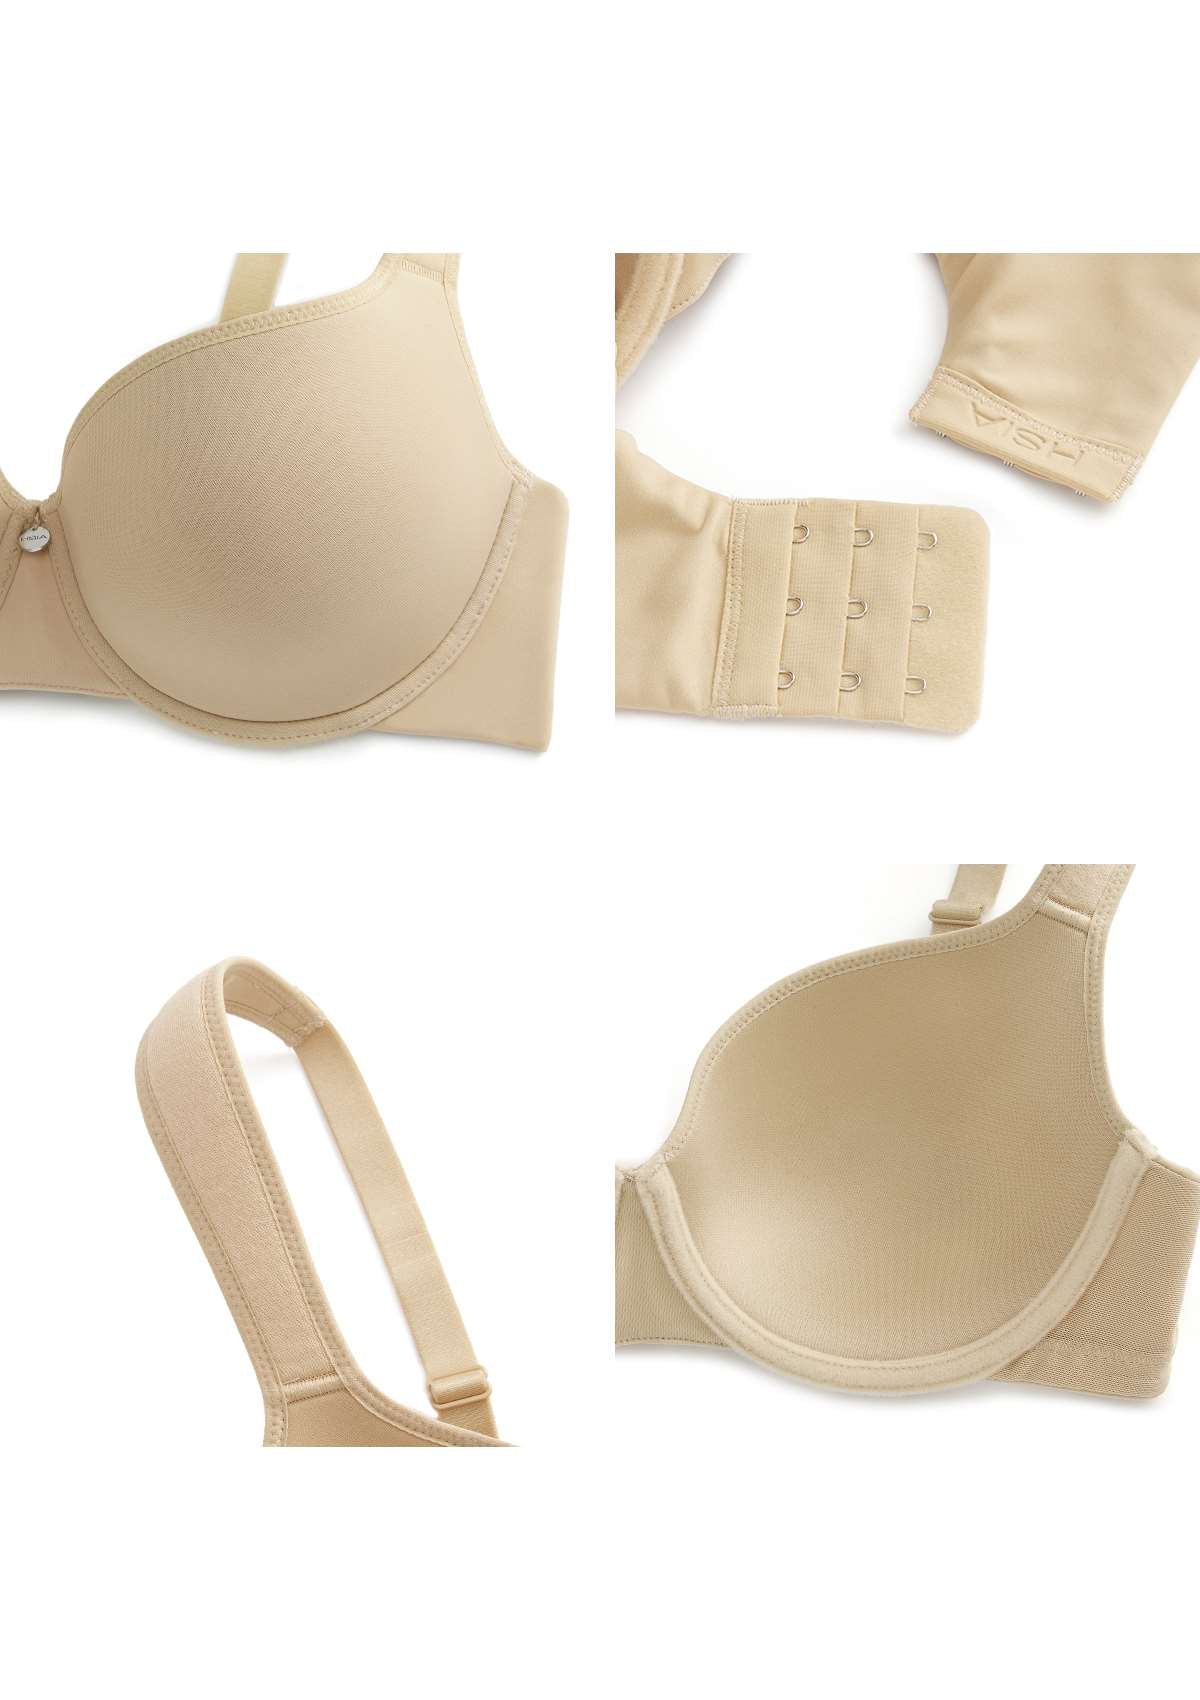 HSIA Patricia Seamless Lightly Padded Minimizer Bra -for Bigger Busts - Beige / 36 / H